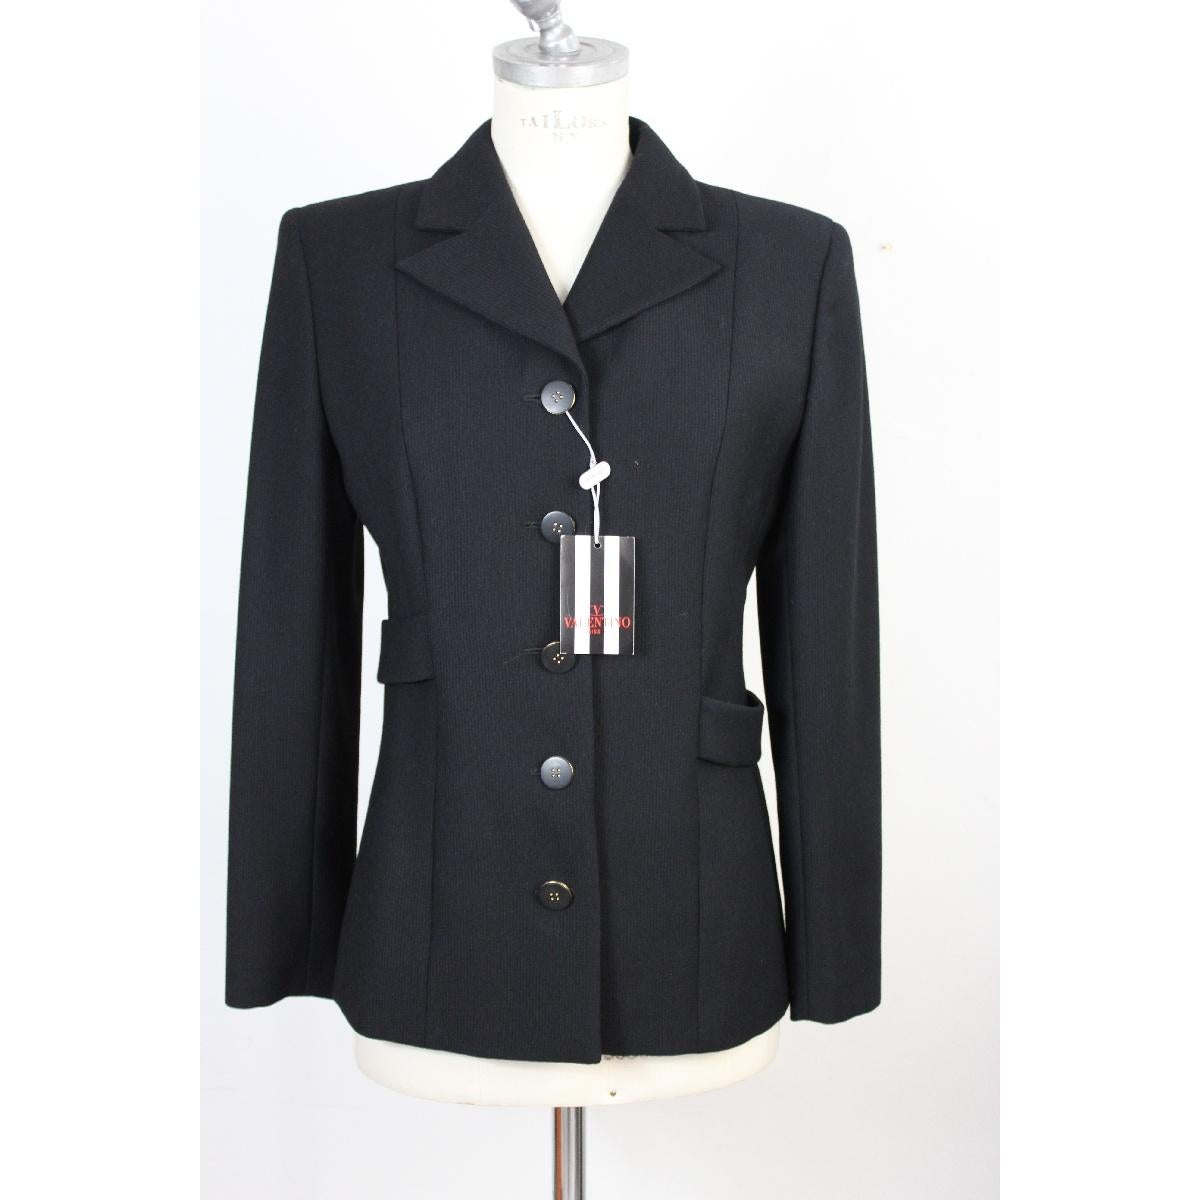 Valentino suit jacket and black trousers in pure wool, new with label. The jacket has a belt behind the back. The trousers have a slit on the bottom, two pockets on the sides and a band on the entire length.

Size 42 It 8 Us 10 Uk

Shoulders: 42